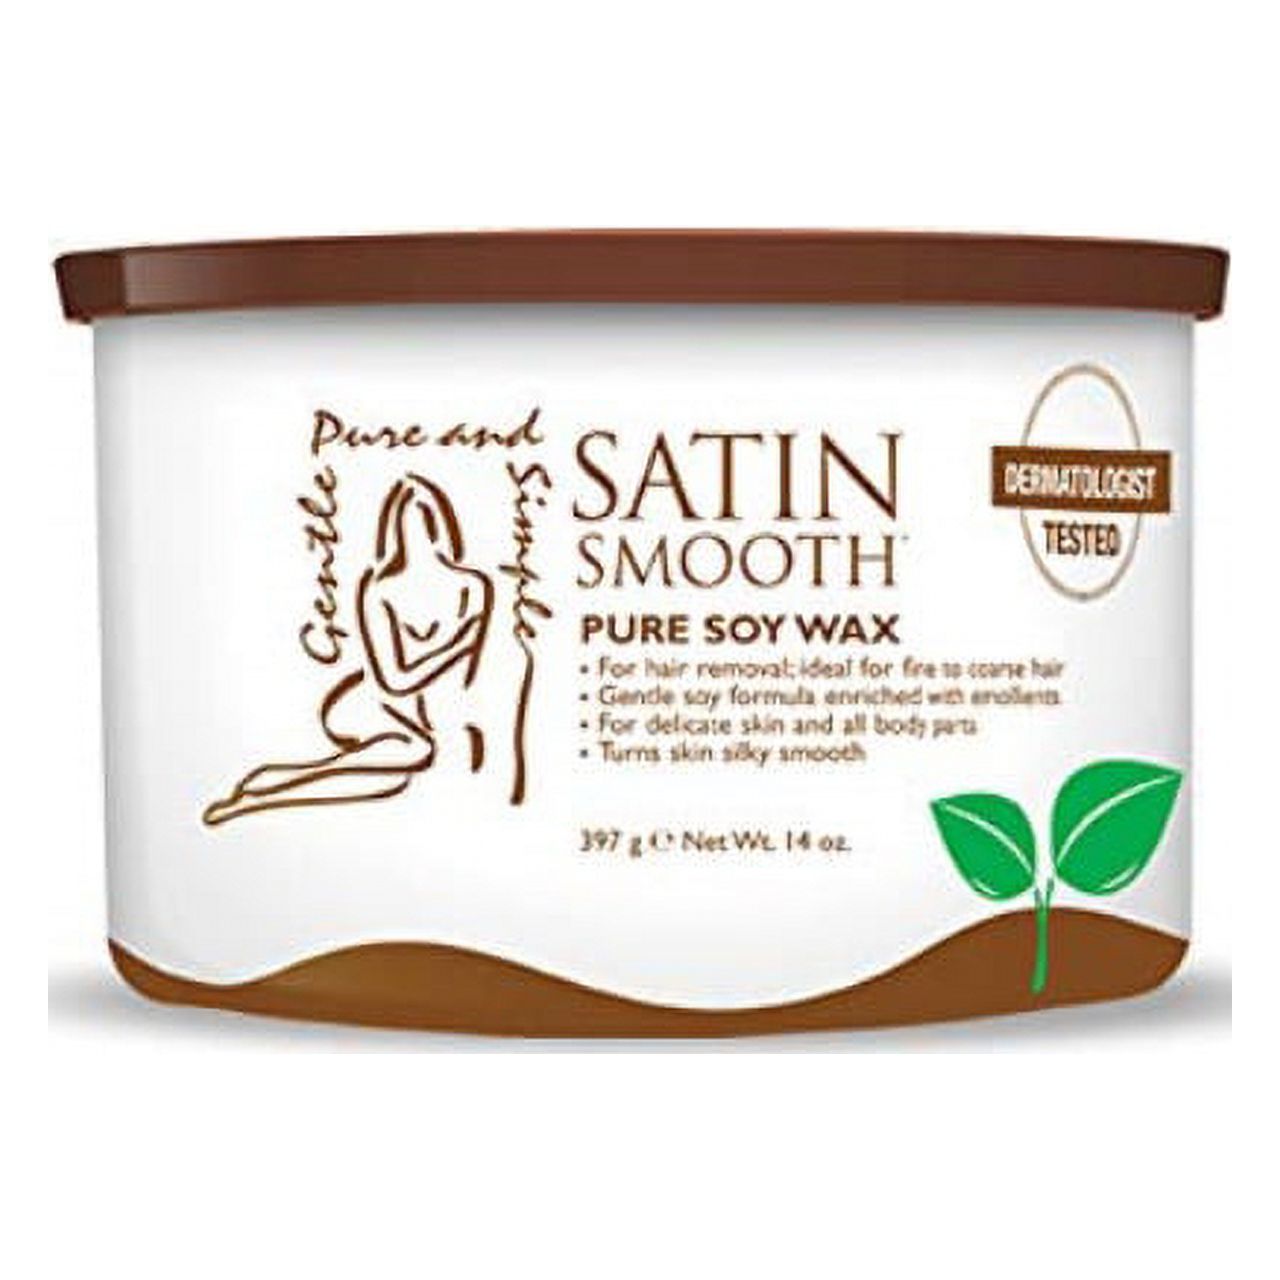 satin smooth organic soy wax, 14 ounce - image 1 of 2